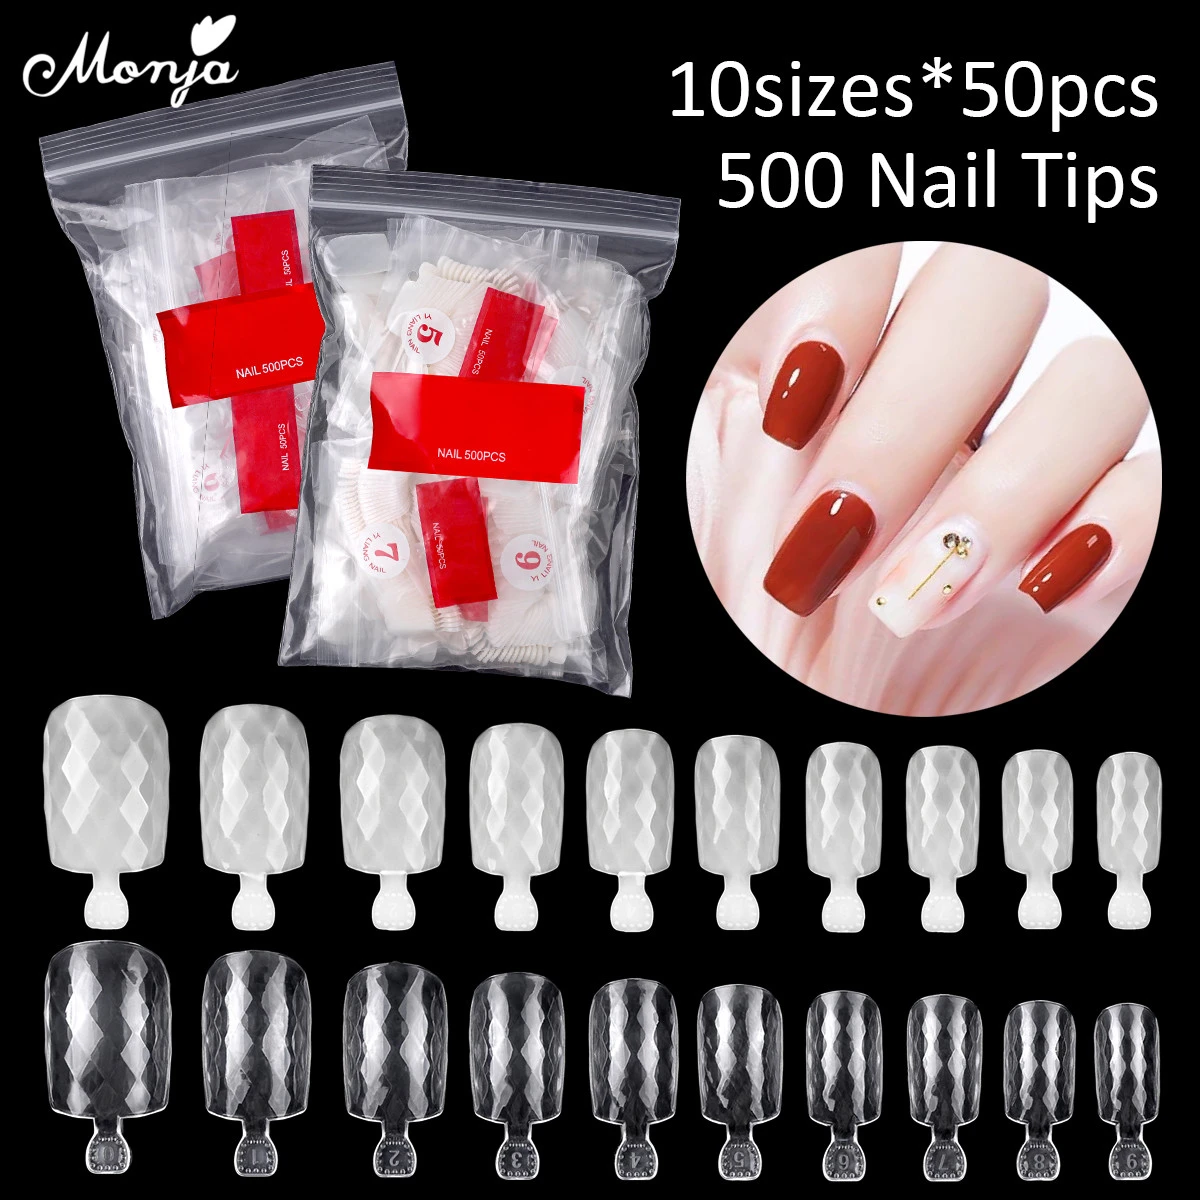 Monja 500 Pcs/Lot Rhombus False Nails Clear Natural Acrylic Full Cover Nail  Tips UV Gel Extension Practice Manicure Tools| | - AliExpress